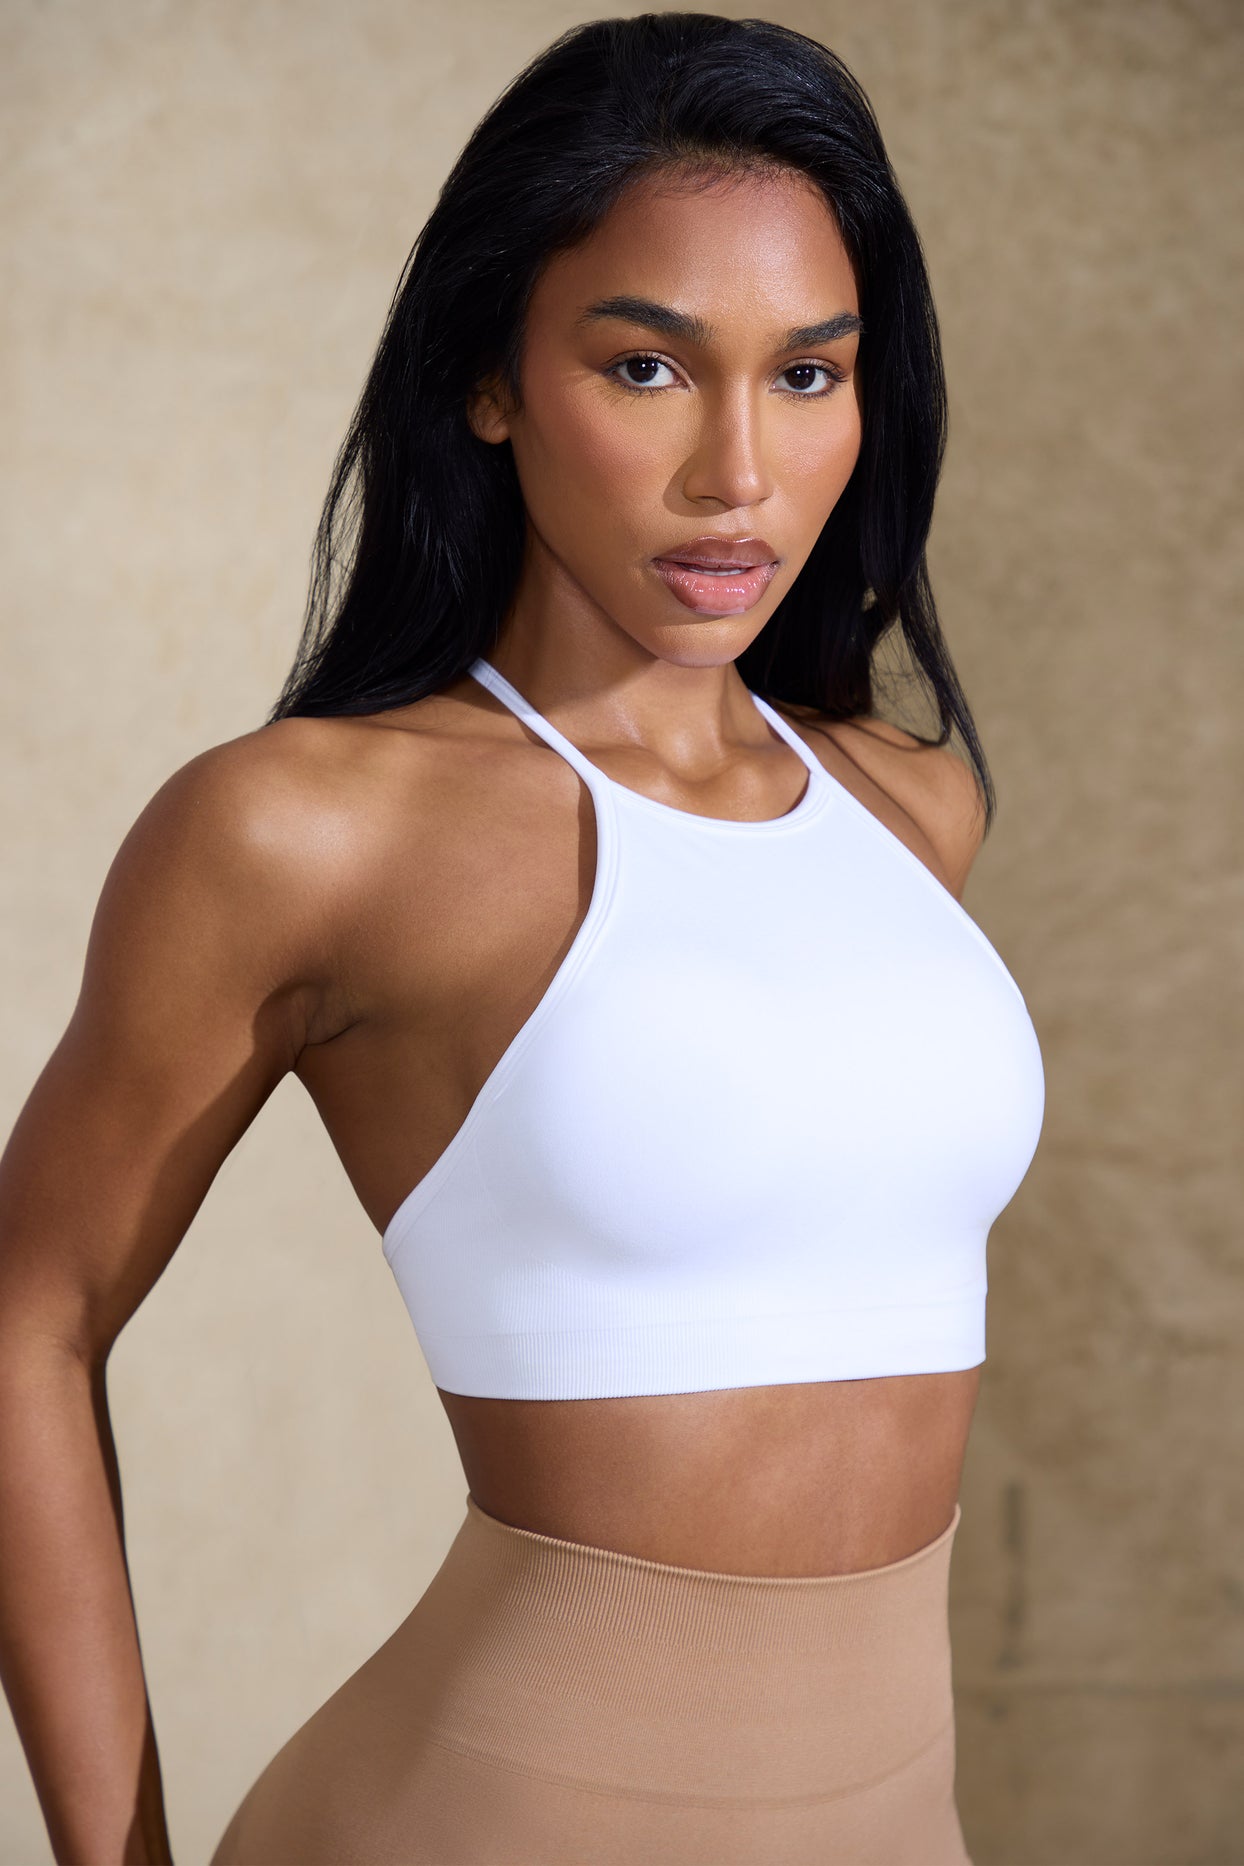 Definition - Low Back Define Luxe Sports Bra in Warm Taupe